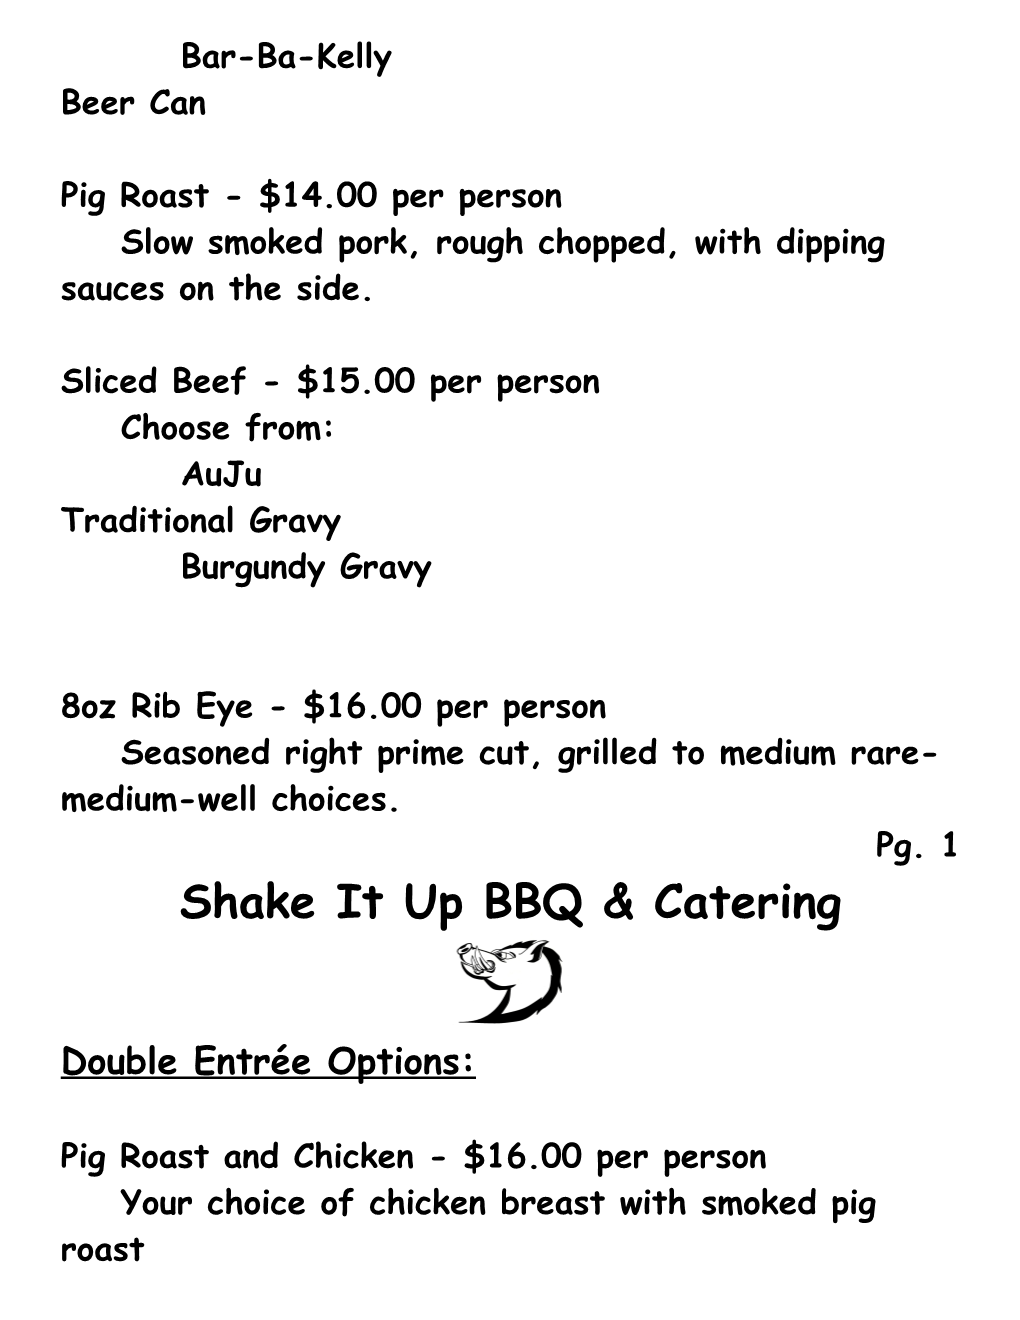 Shake It up BBQ & Catering